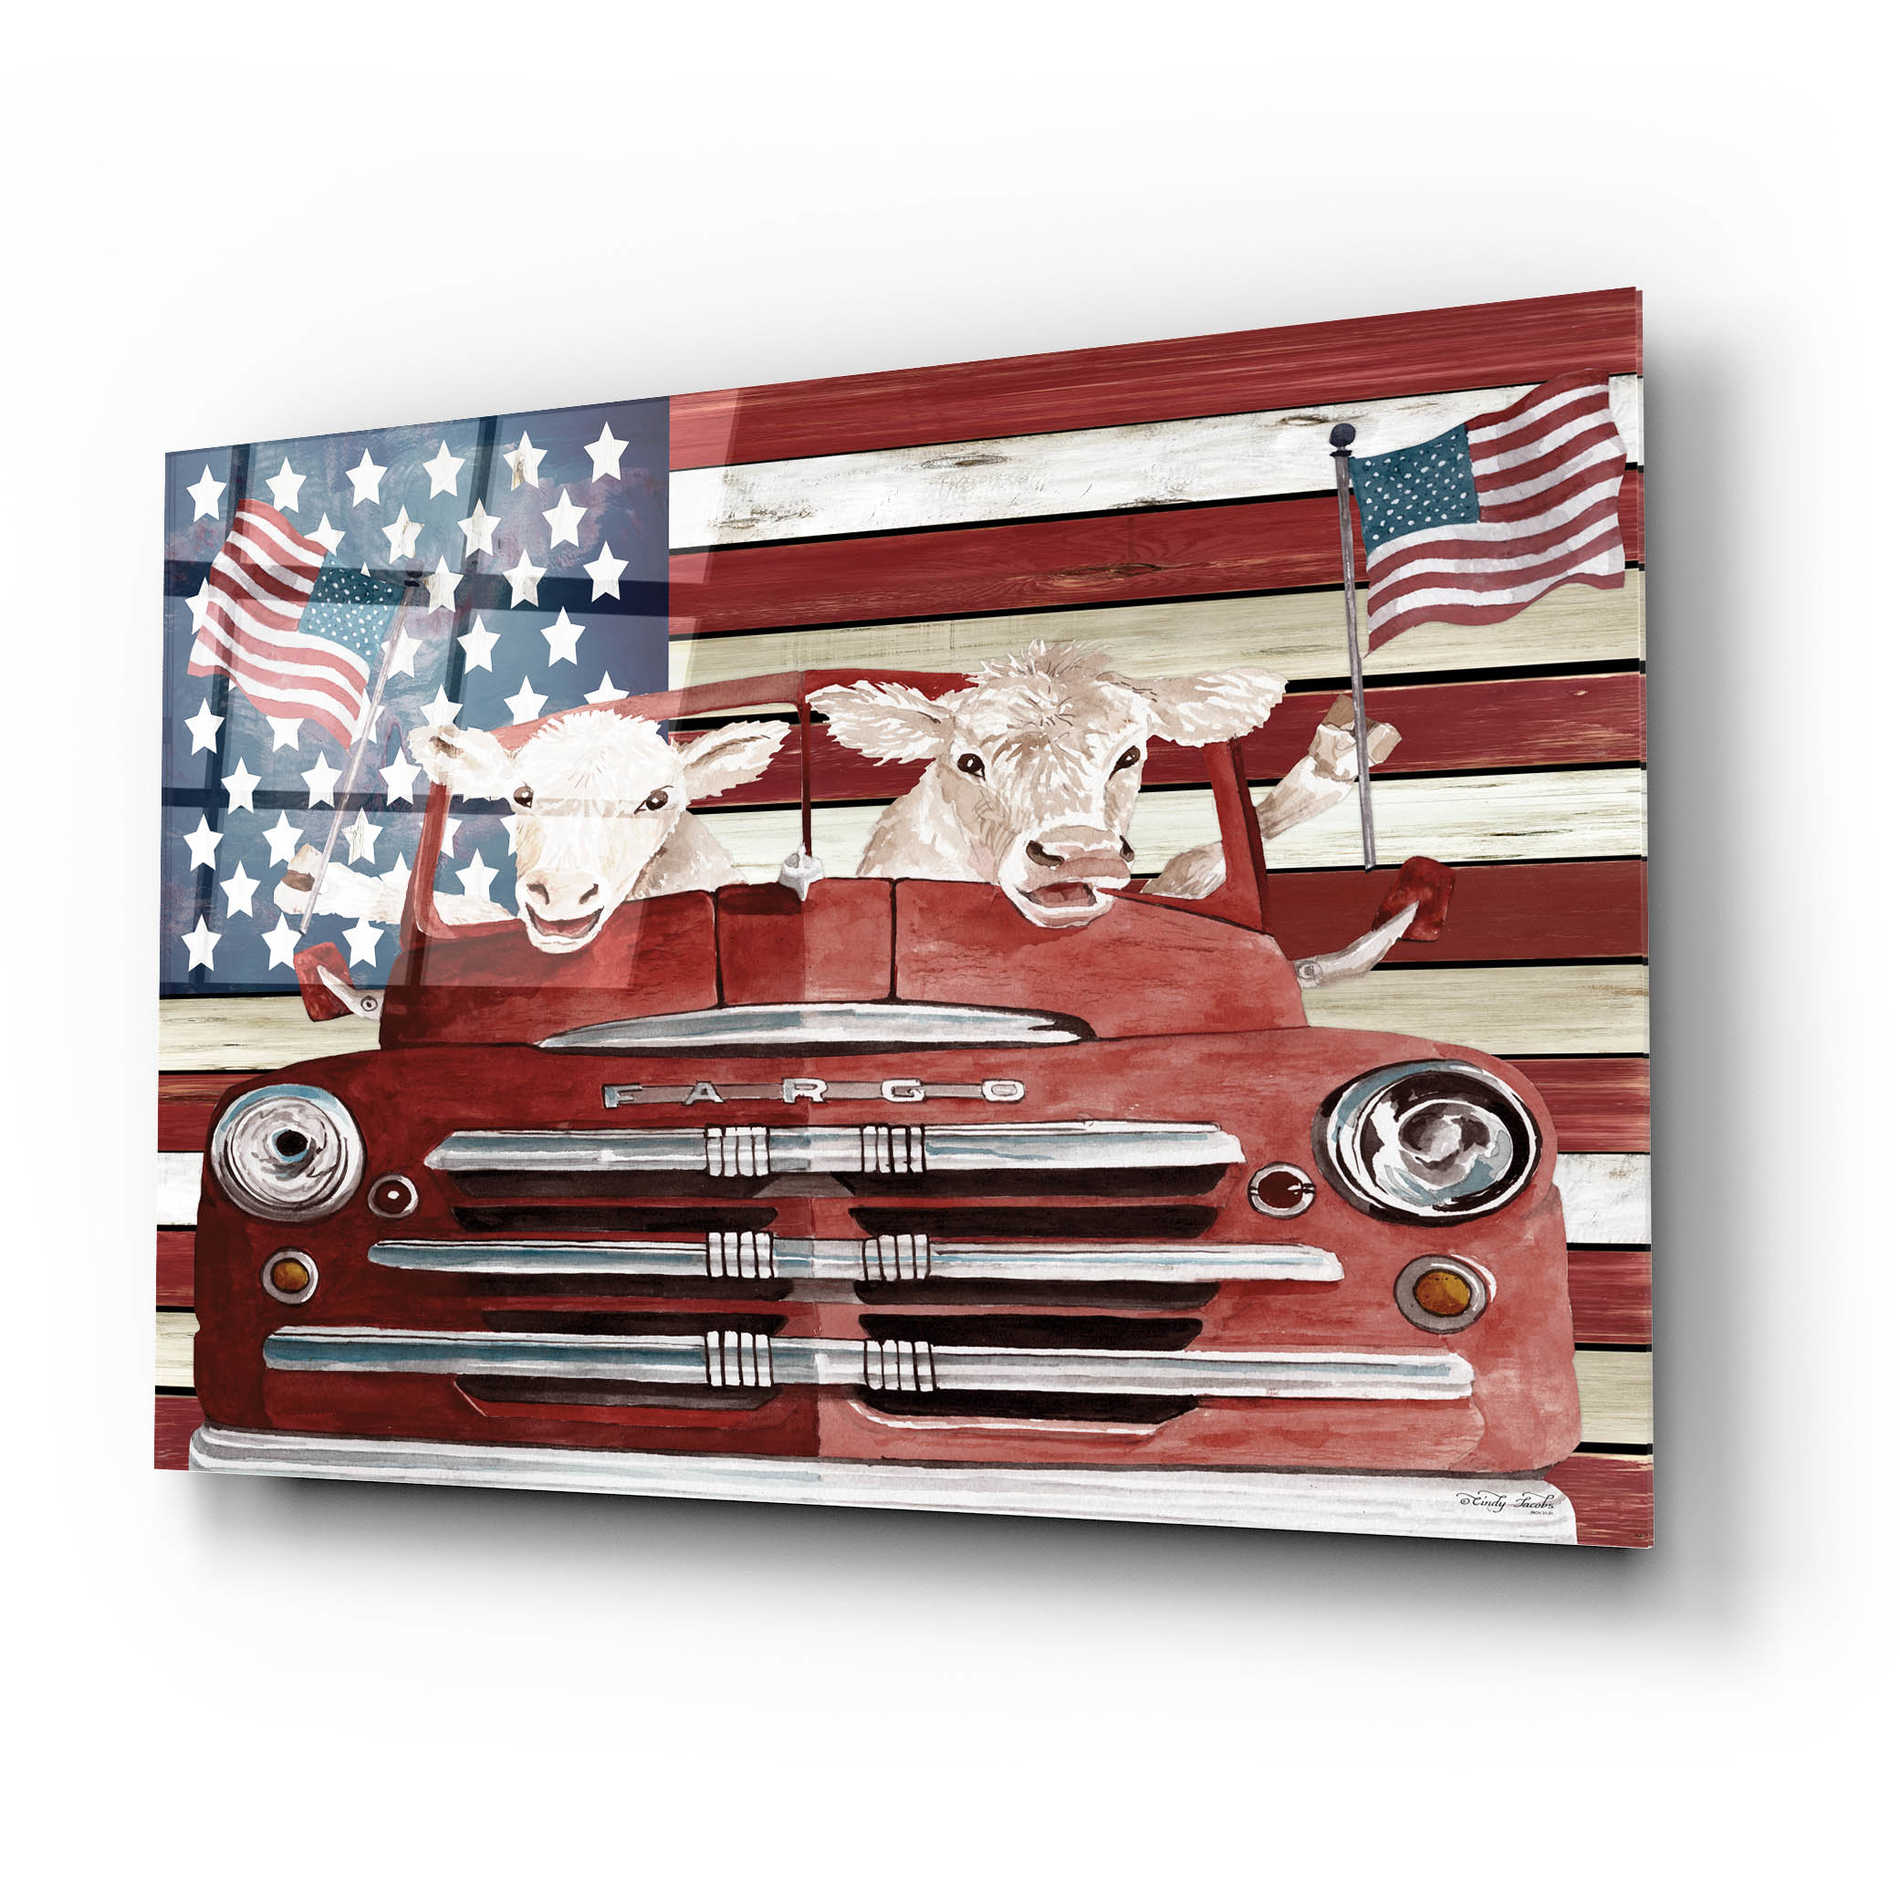 Epic Art 'Patriotic Cows' by Cindy Jacobs, Acrylic Glass Wall Art,24x16